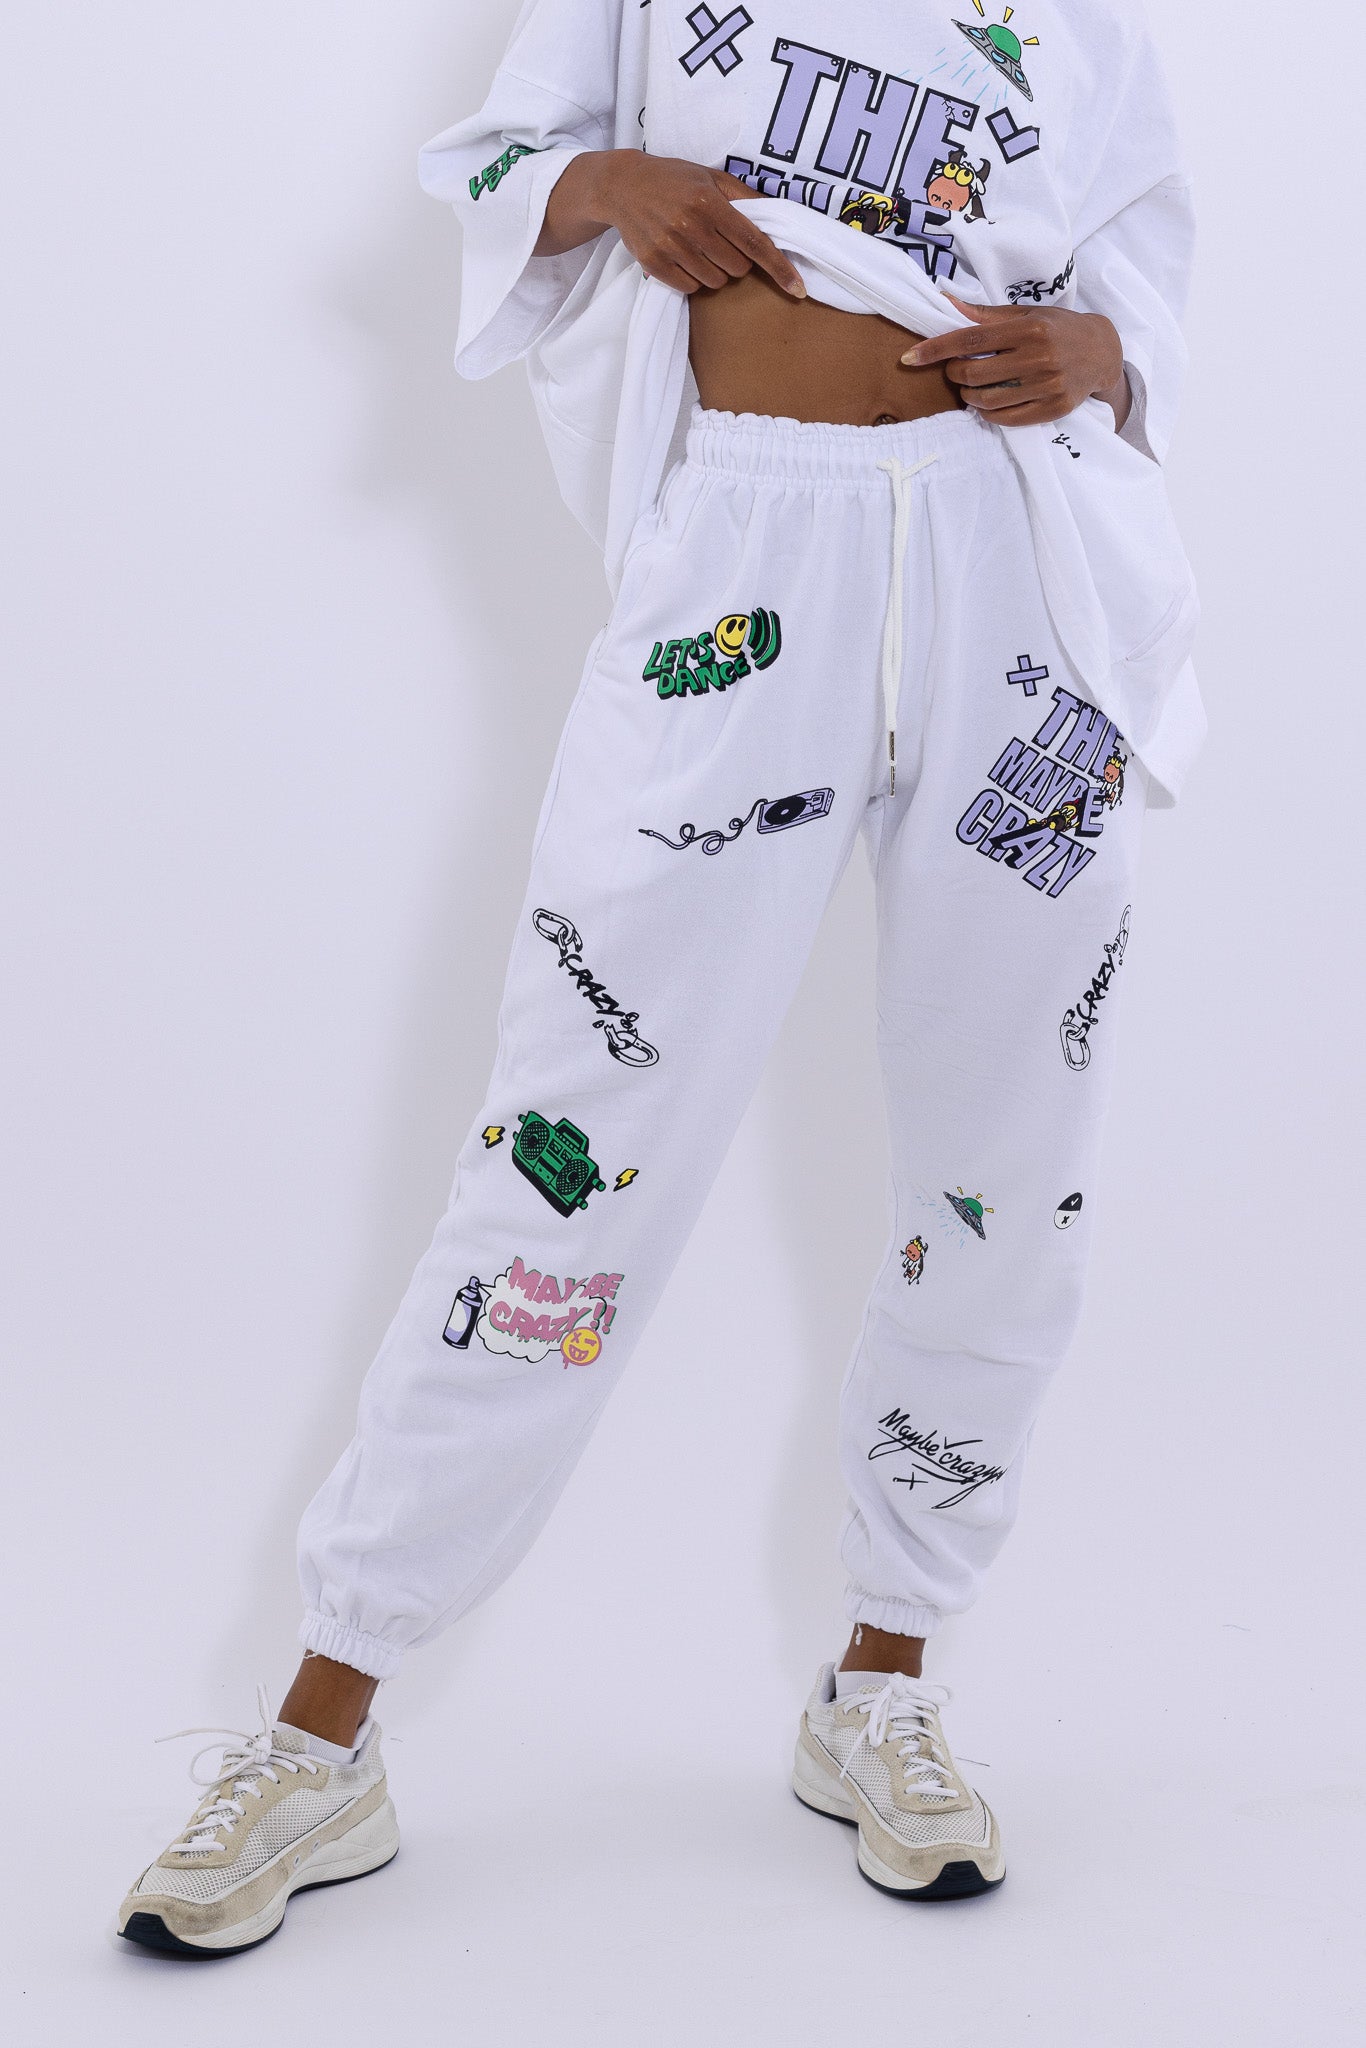 The Maybe Crazy UFO Sweatpants